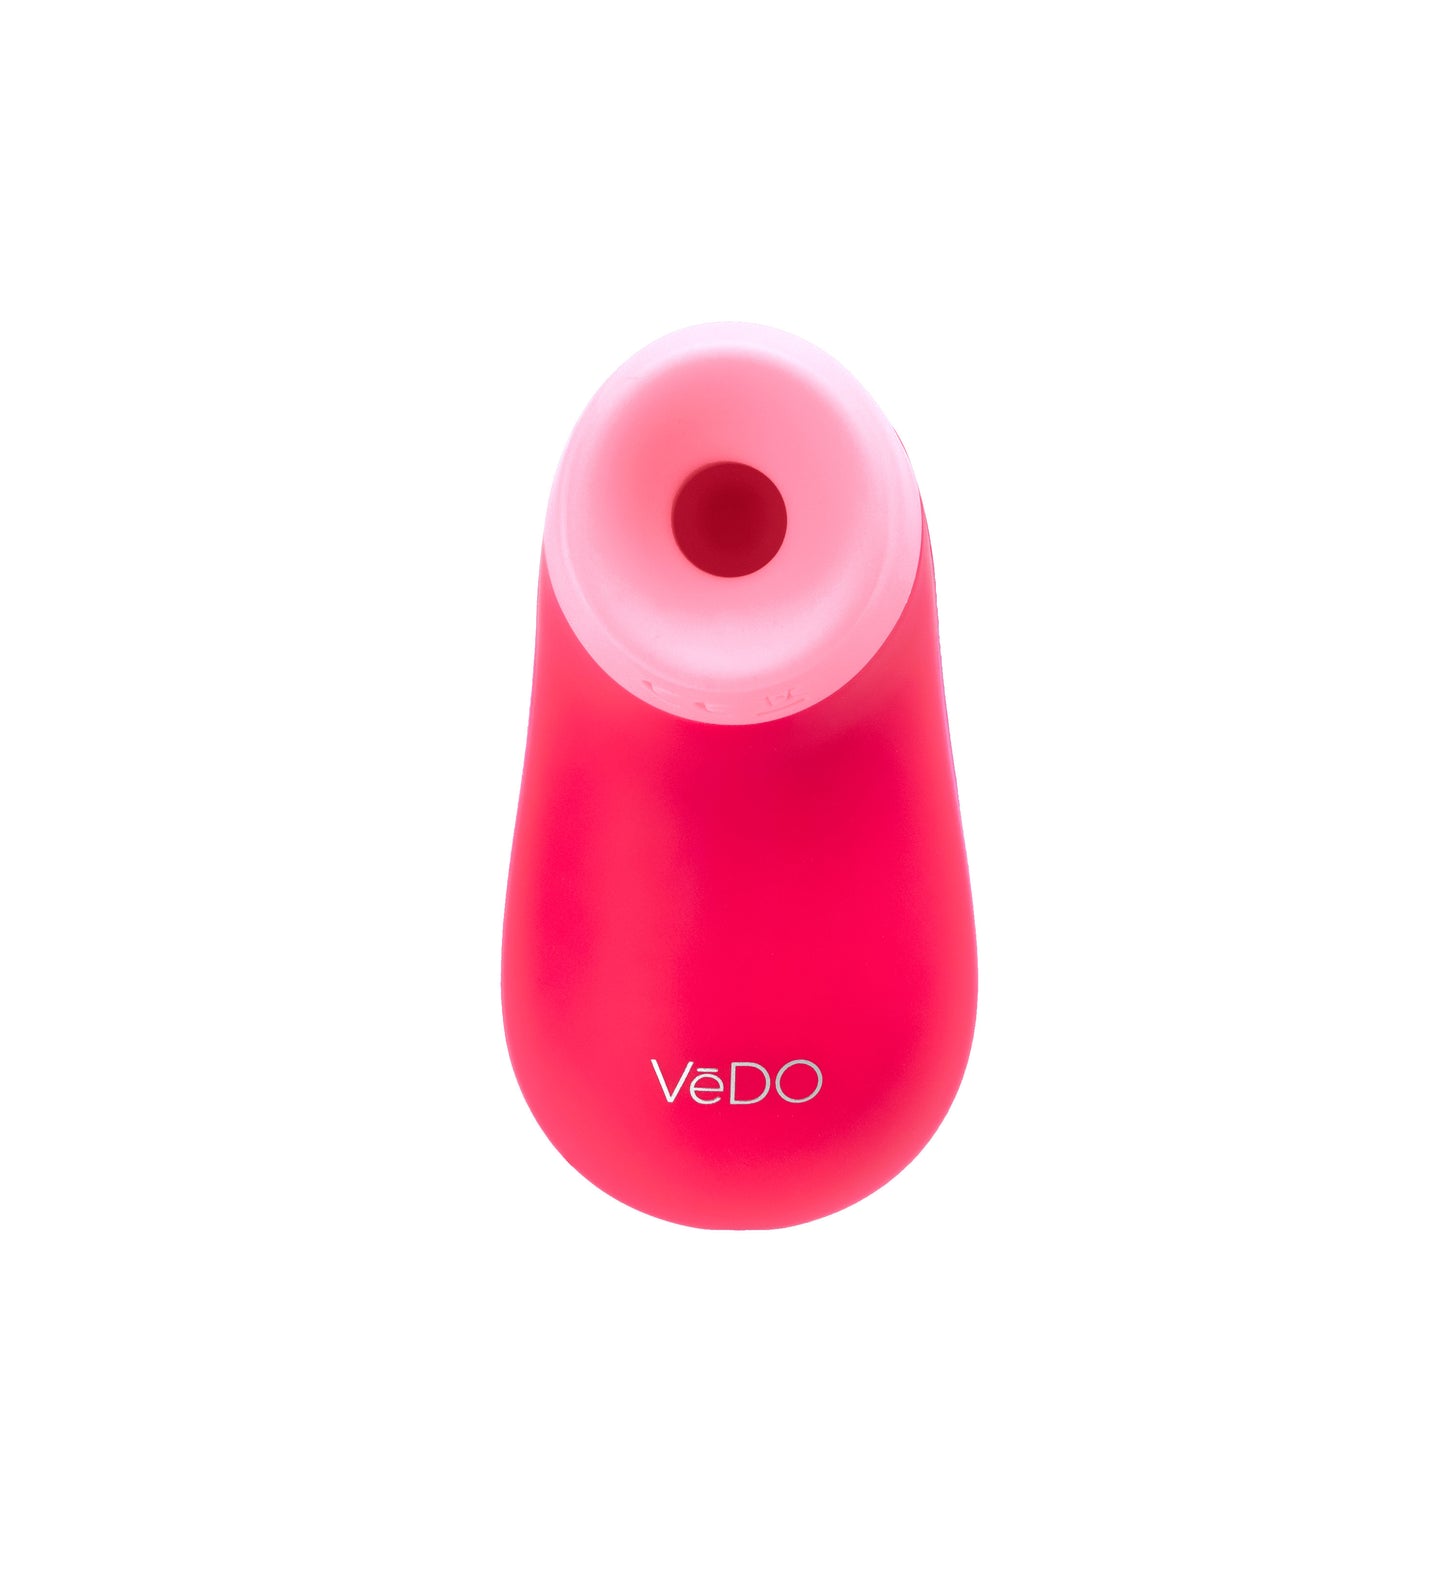 Nami Rechargeable Sonic Vibe - Foxy Pink VI-F1009